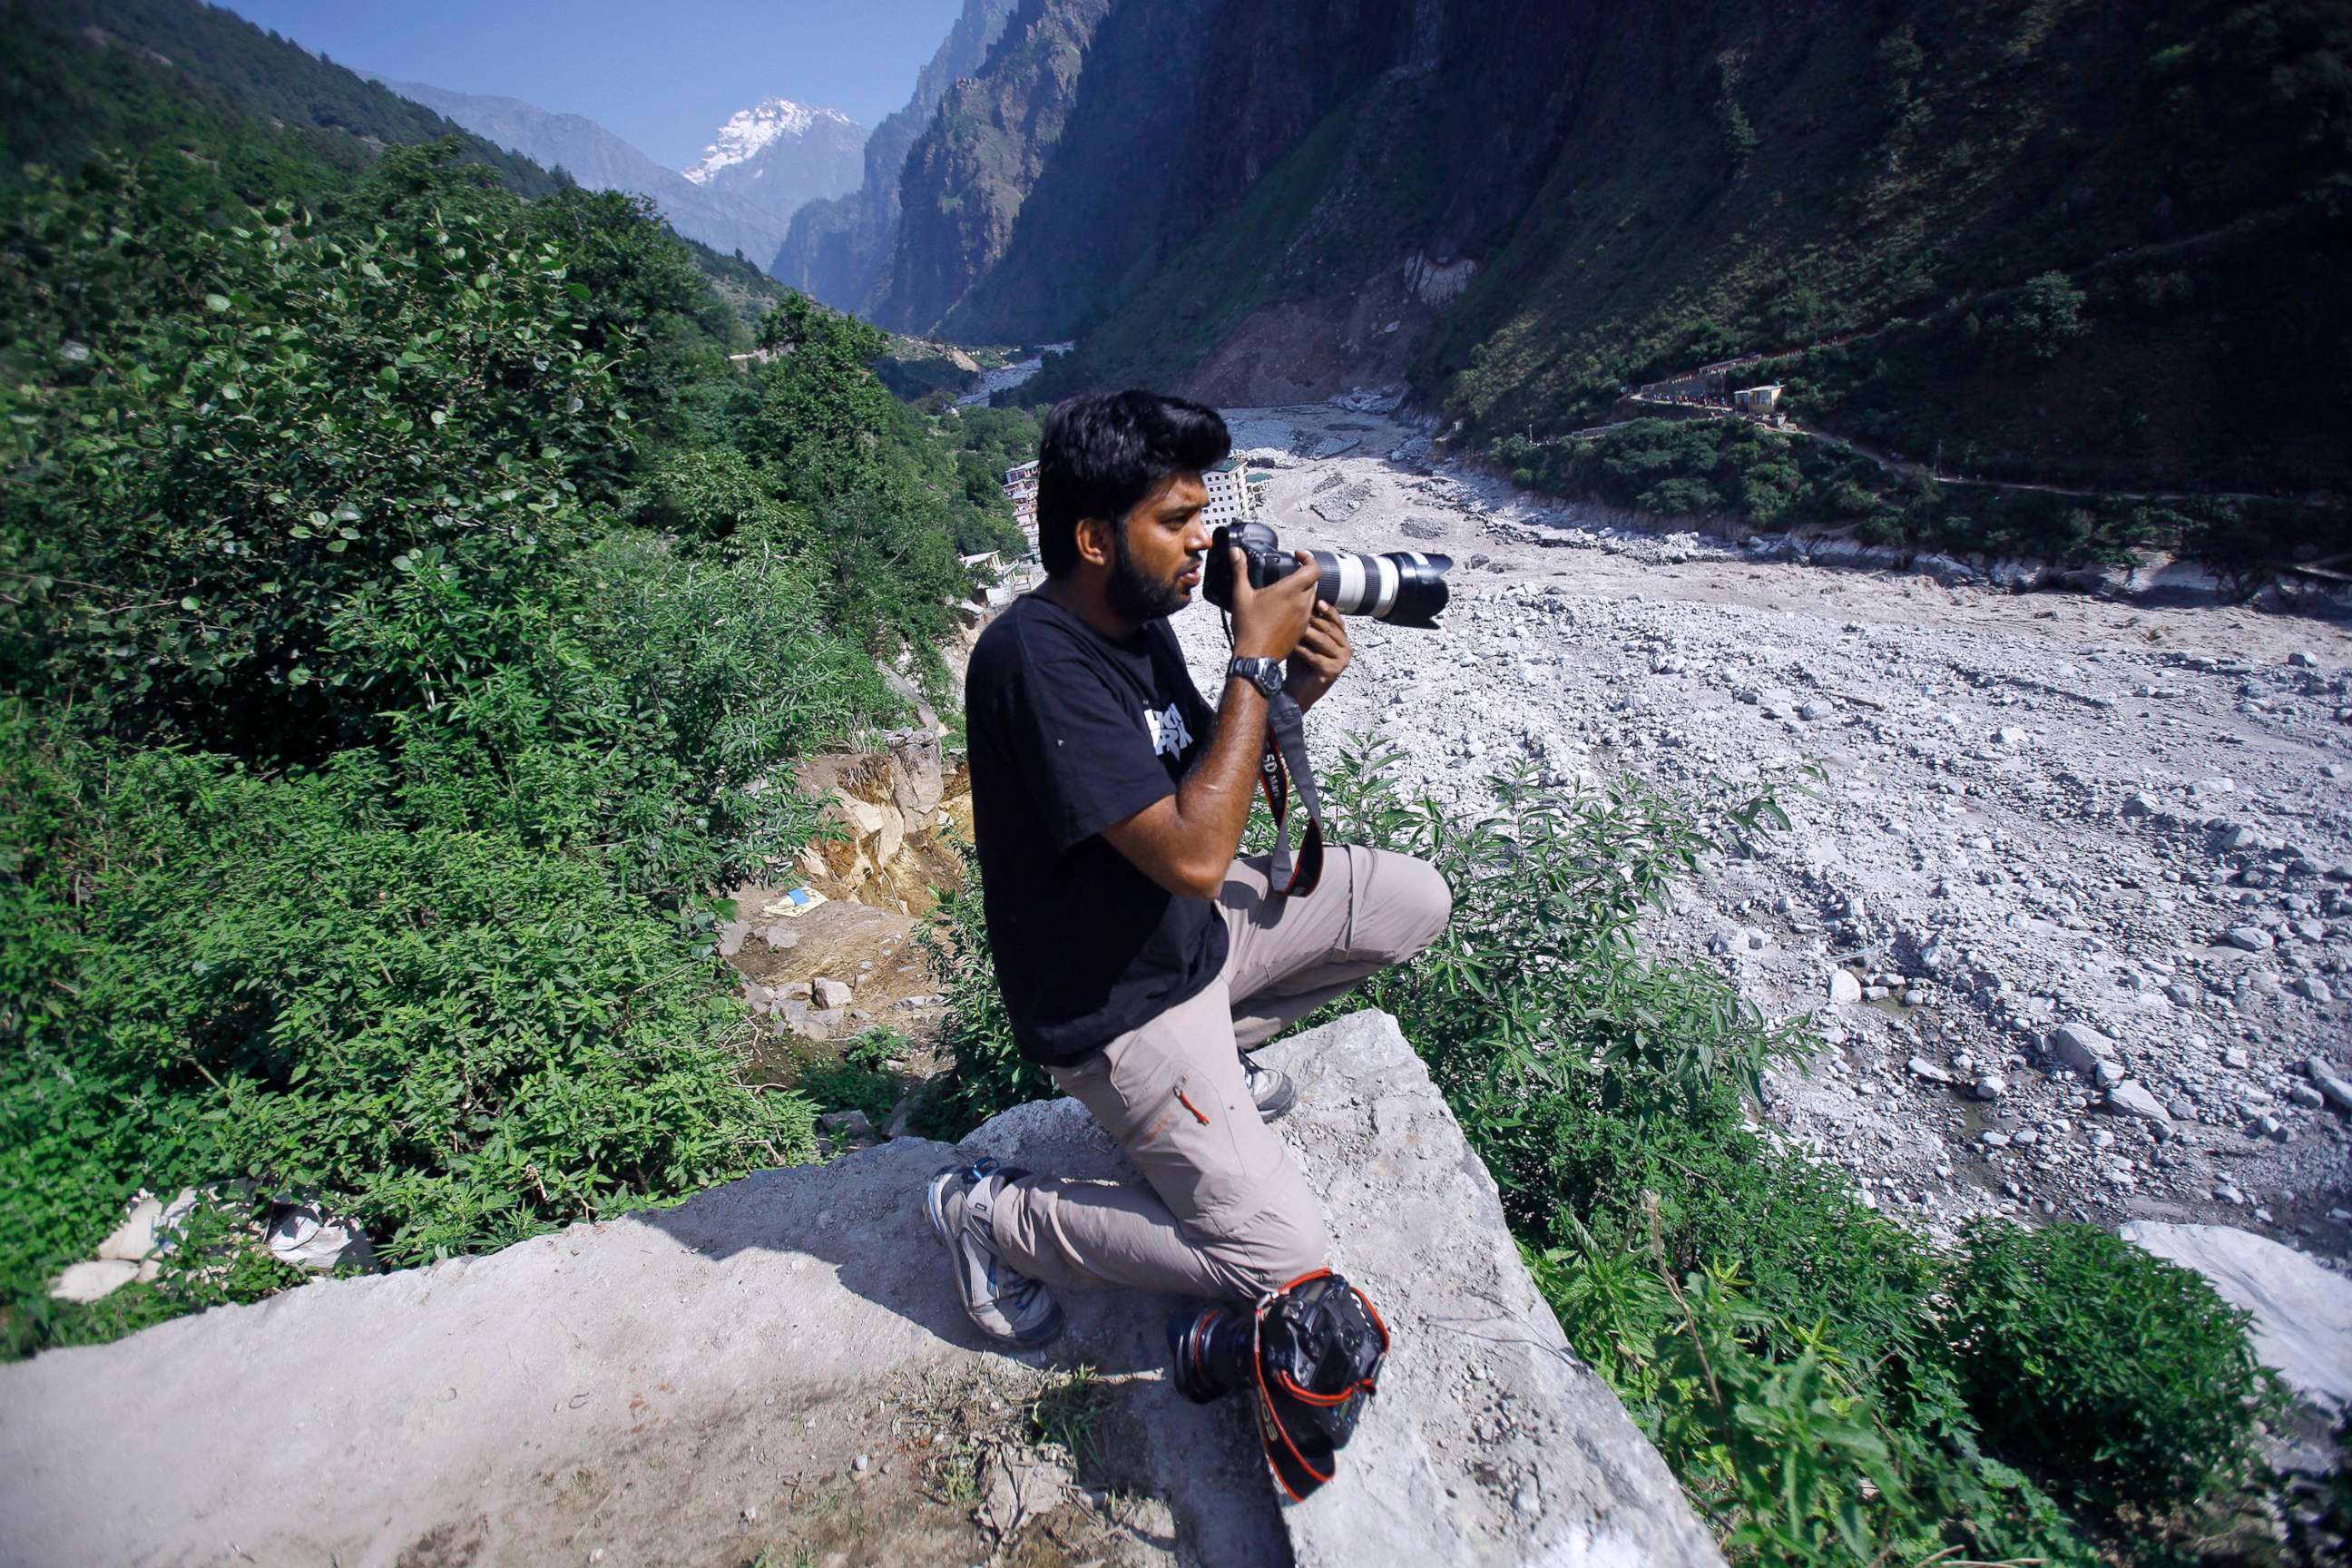 PHOTO: Reuters photographer Danish Siddiqui covers the monsoon floods and landslides in the upper reaches of Govindghat, India, June 22, 2013.